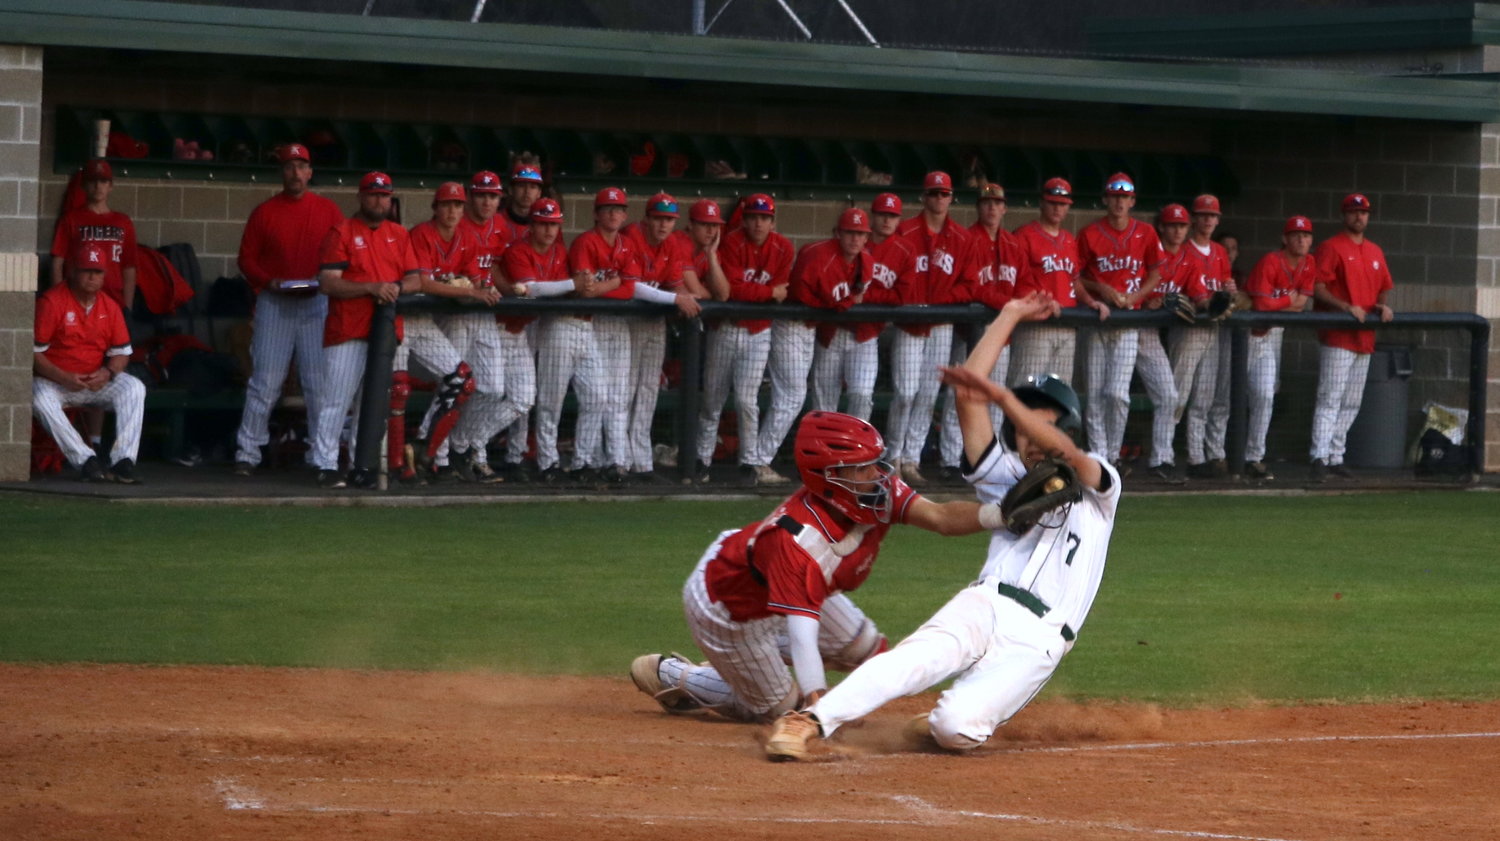 Reese Ruderman tags out a runner at home plate during Tuesday’s game between Katy and Mayde Creek at the Mayde Creek baseball field.